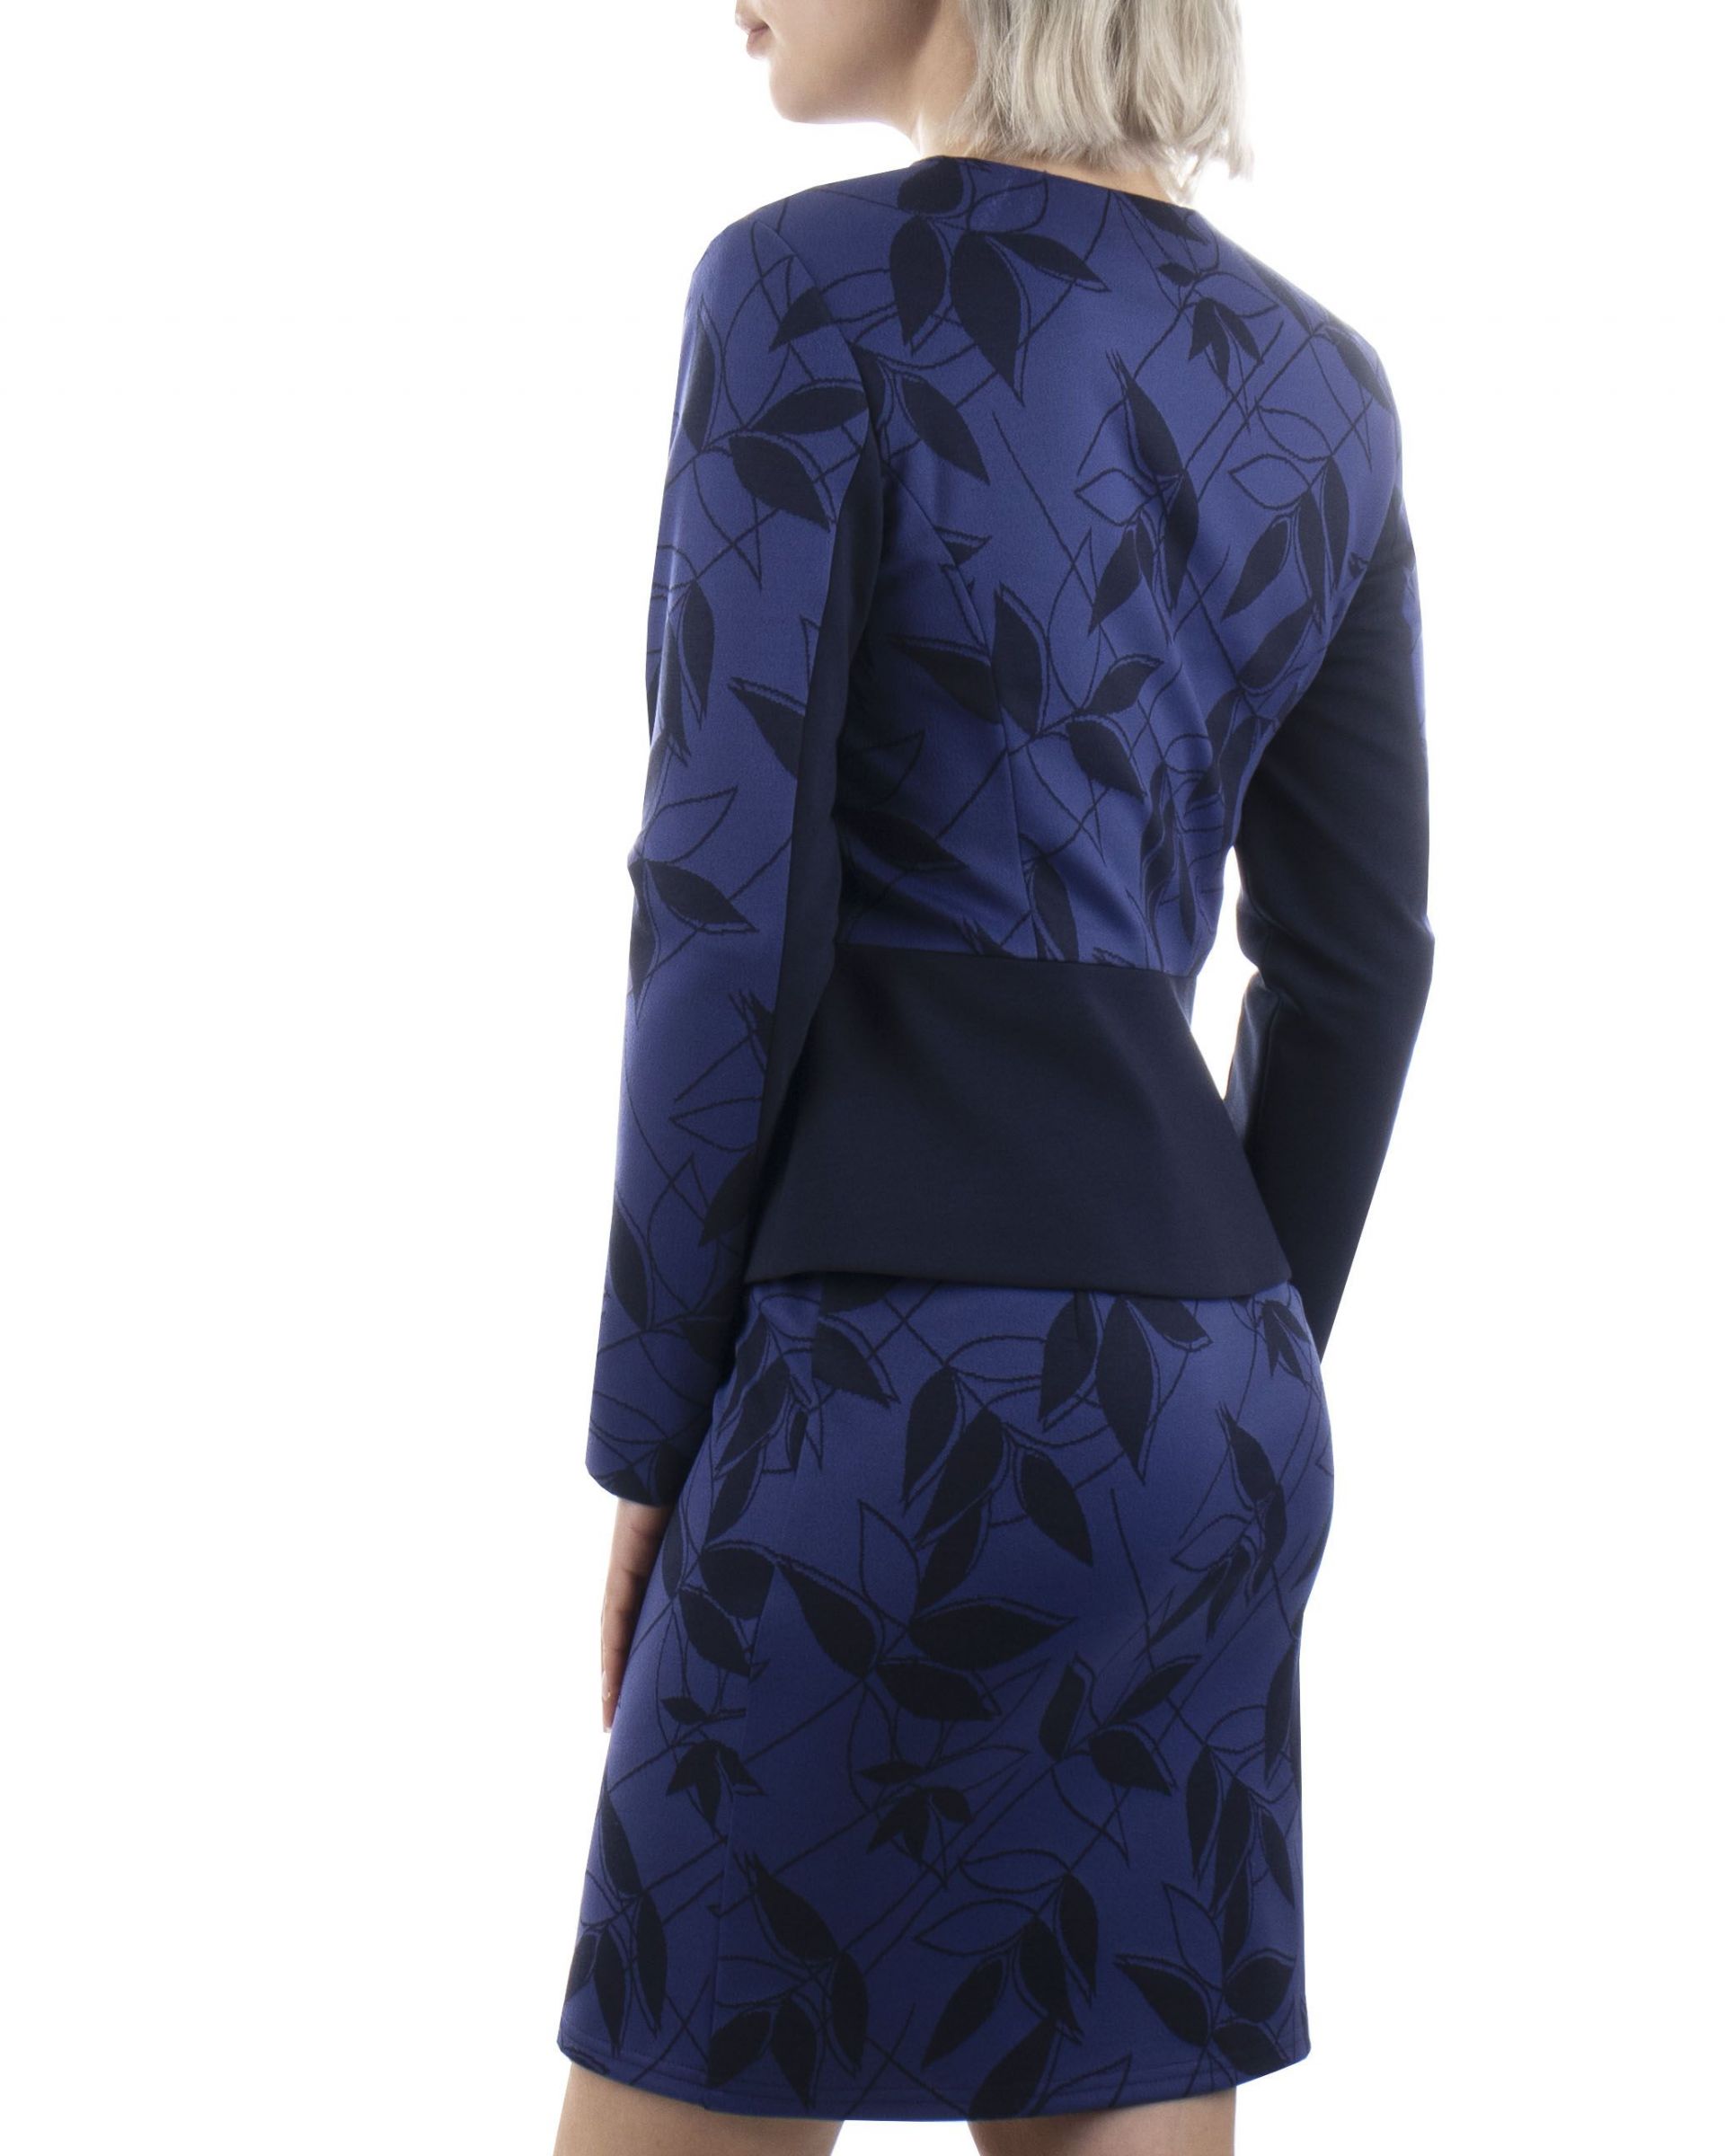 Zipper jacket with round neck, with contrasting elements with stylized leaves print 3